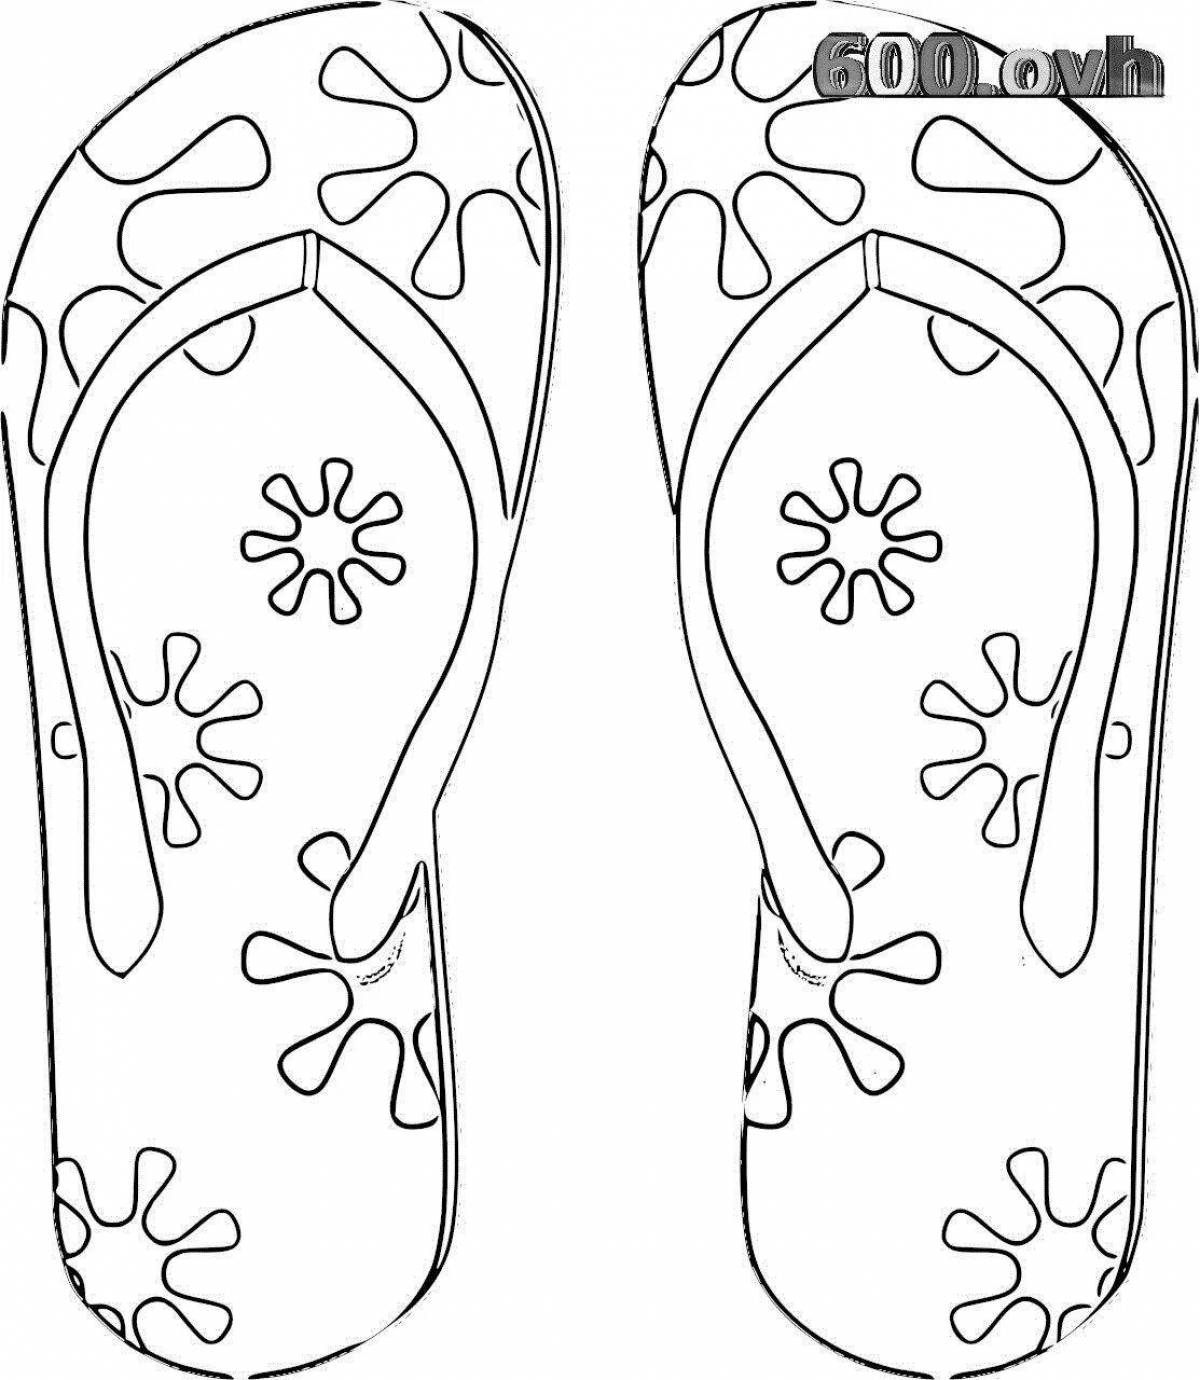 Magic sandals coloring page